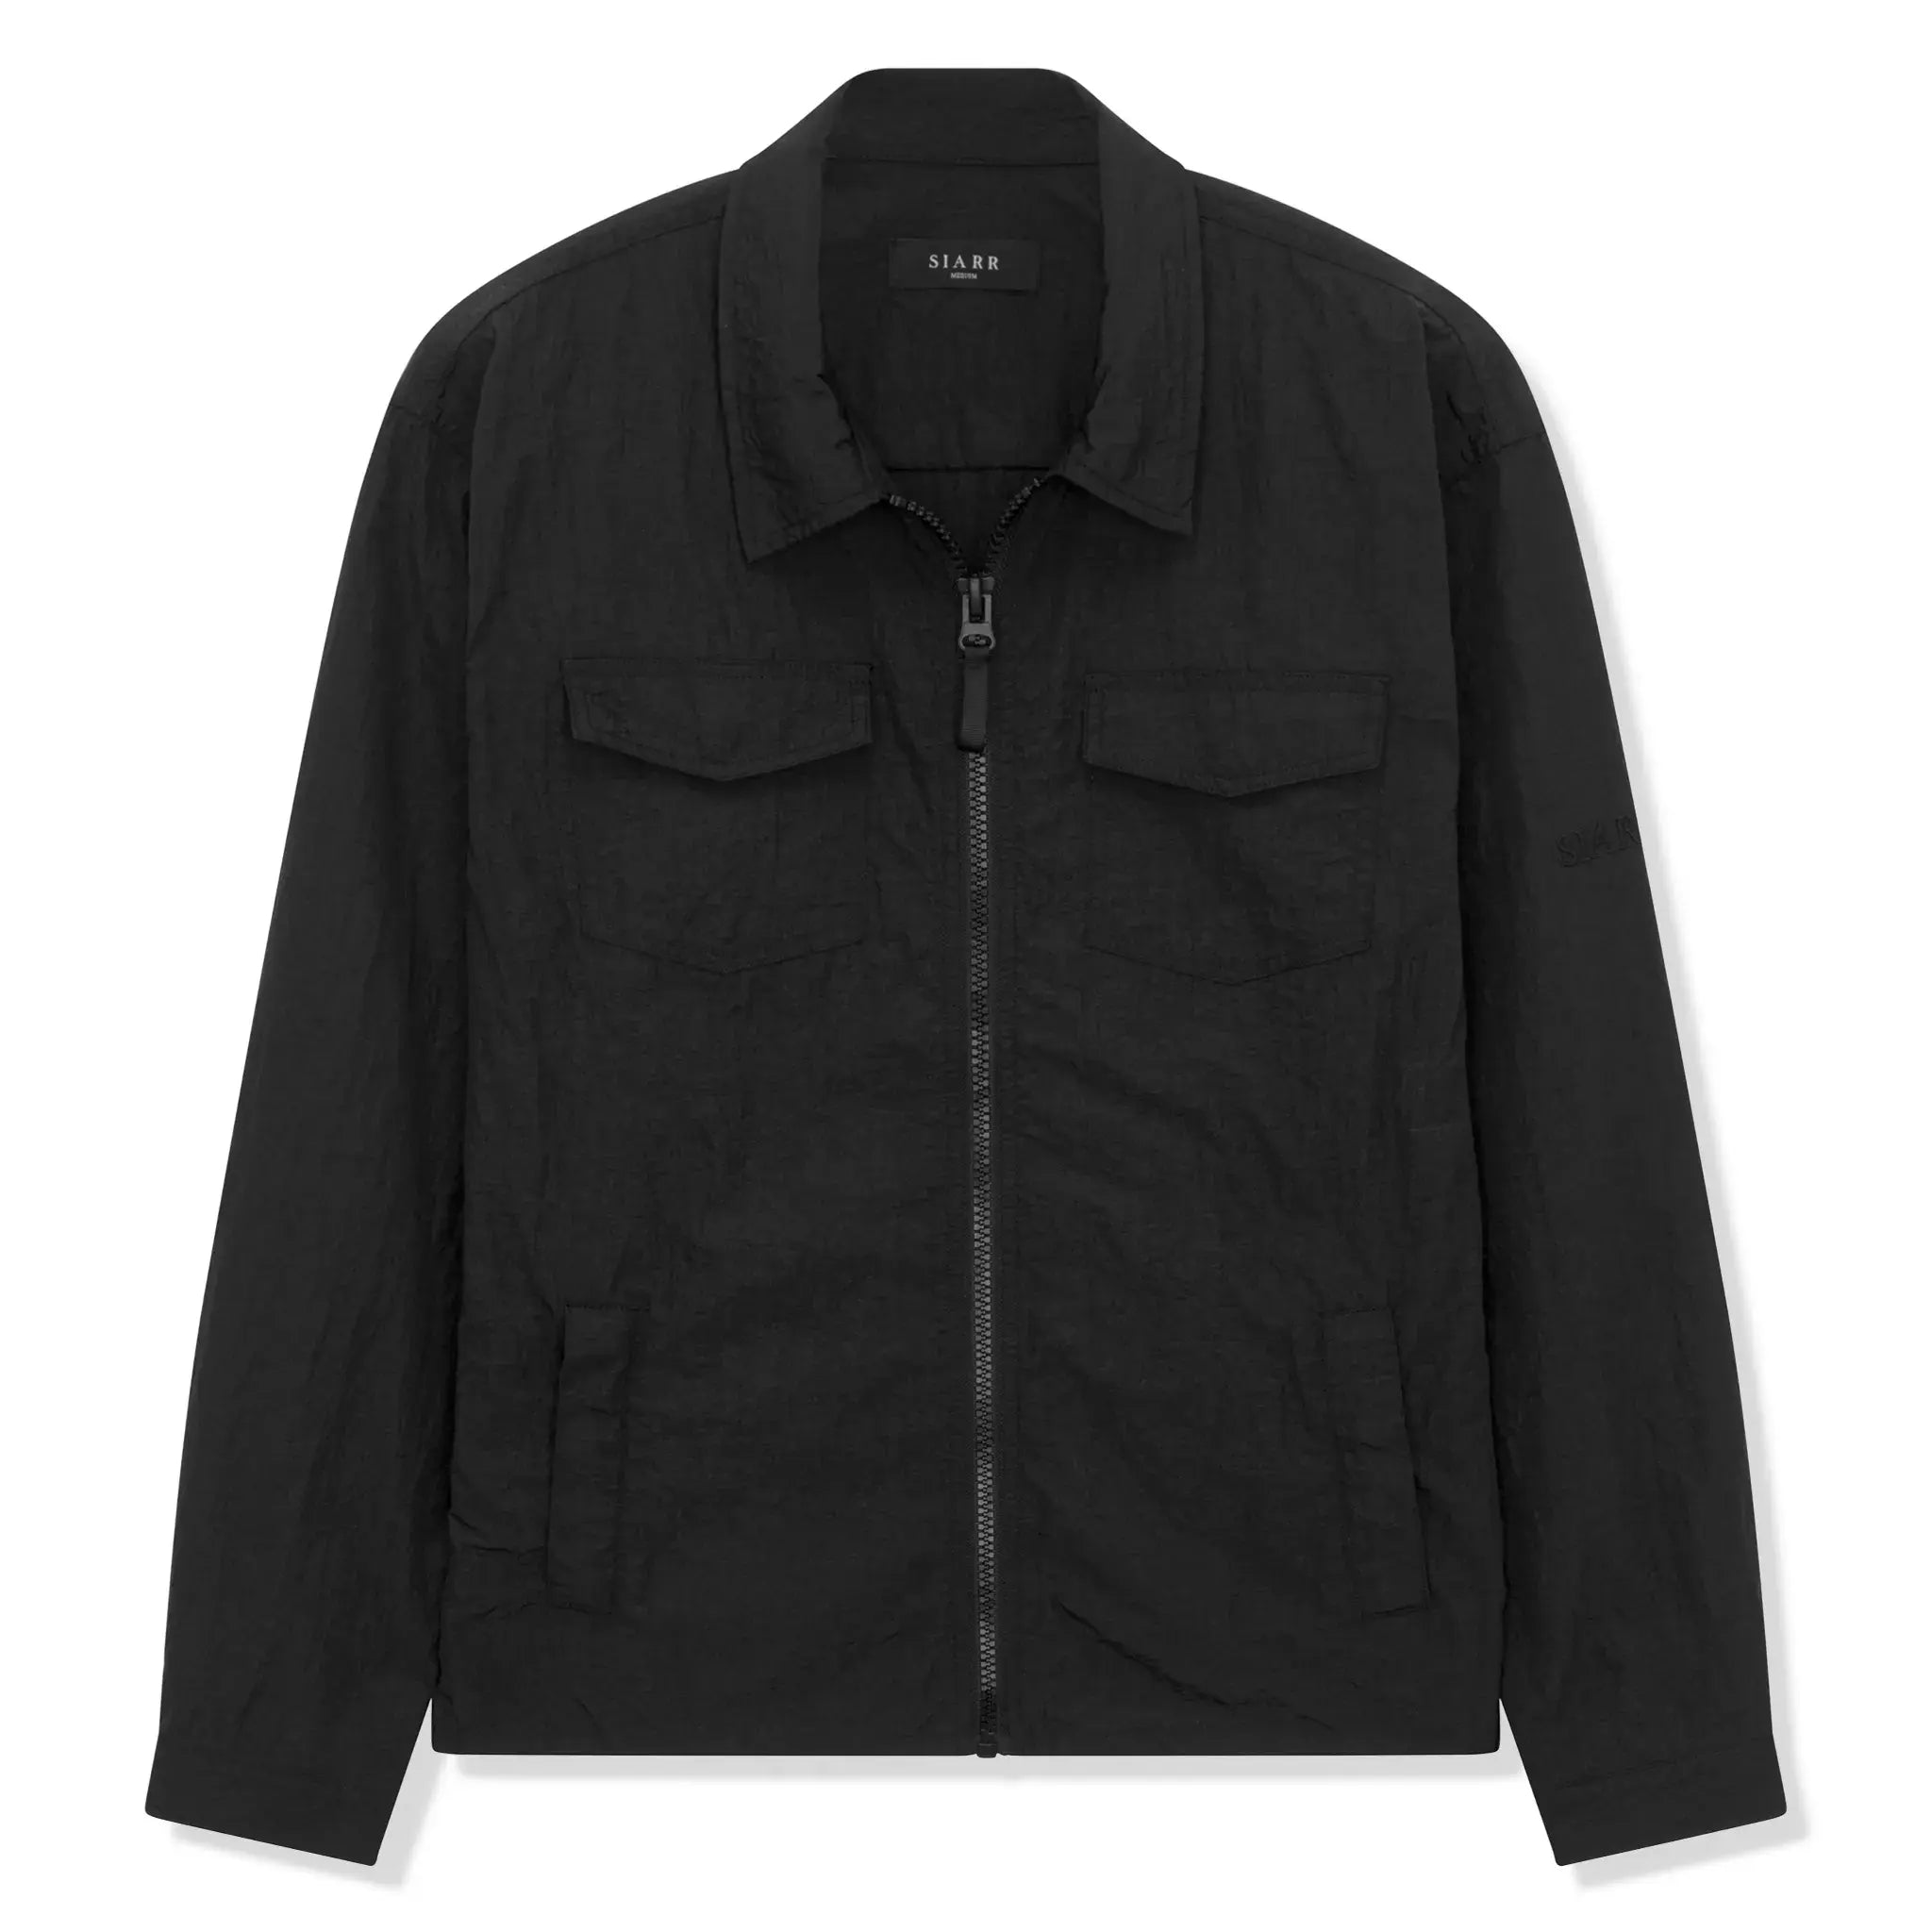 Front view of SIARR Crinkle Black Overshirt